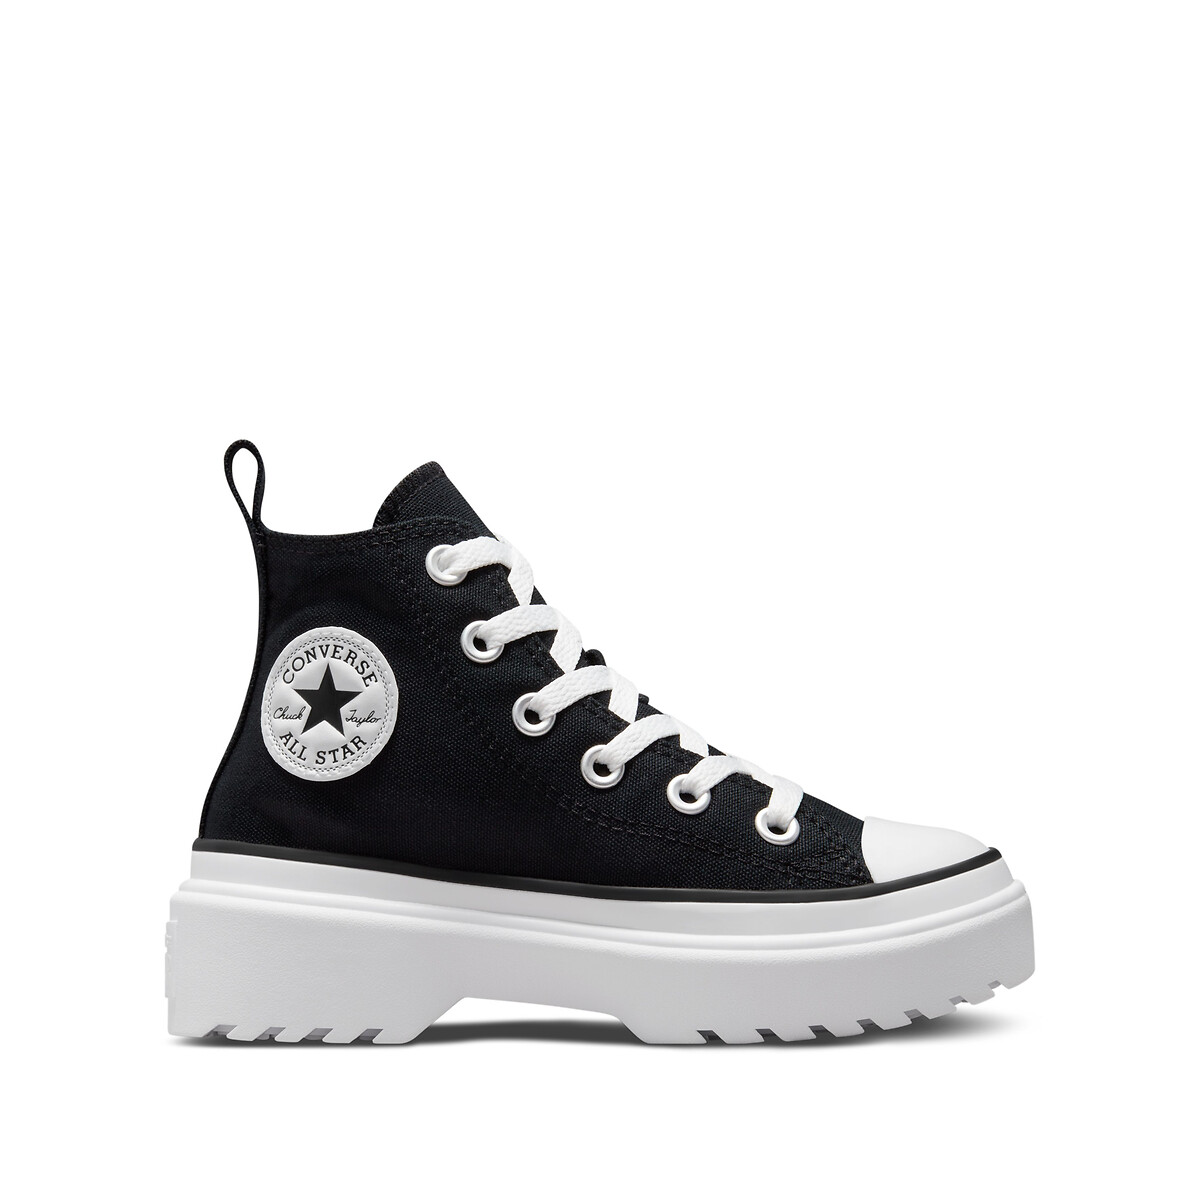 Sneakers Lugged Lift Hi Foundational Canvas von Converse